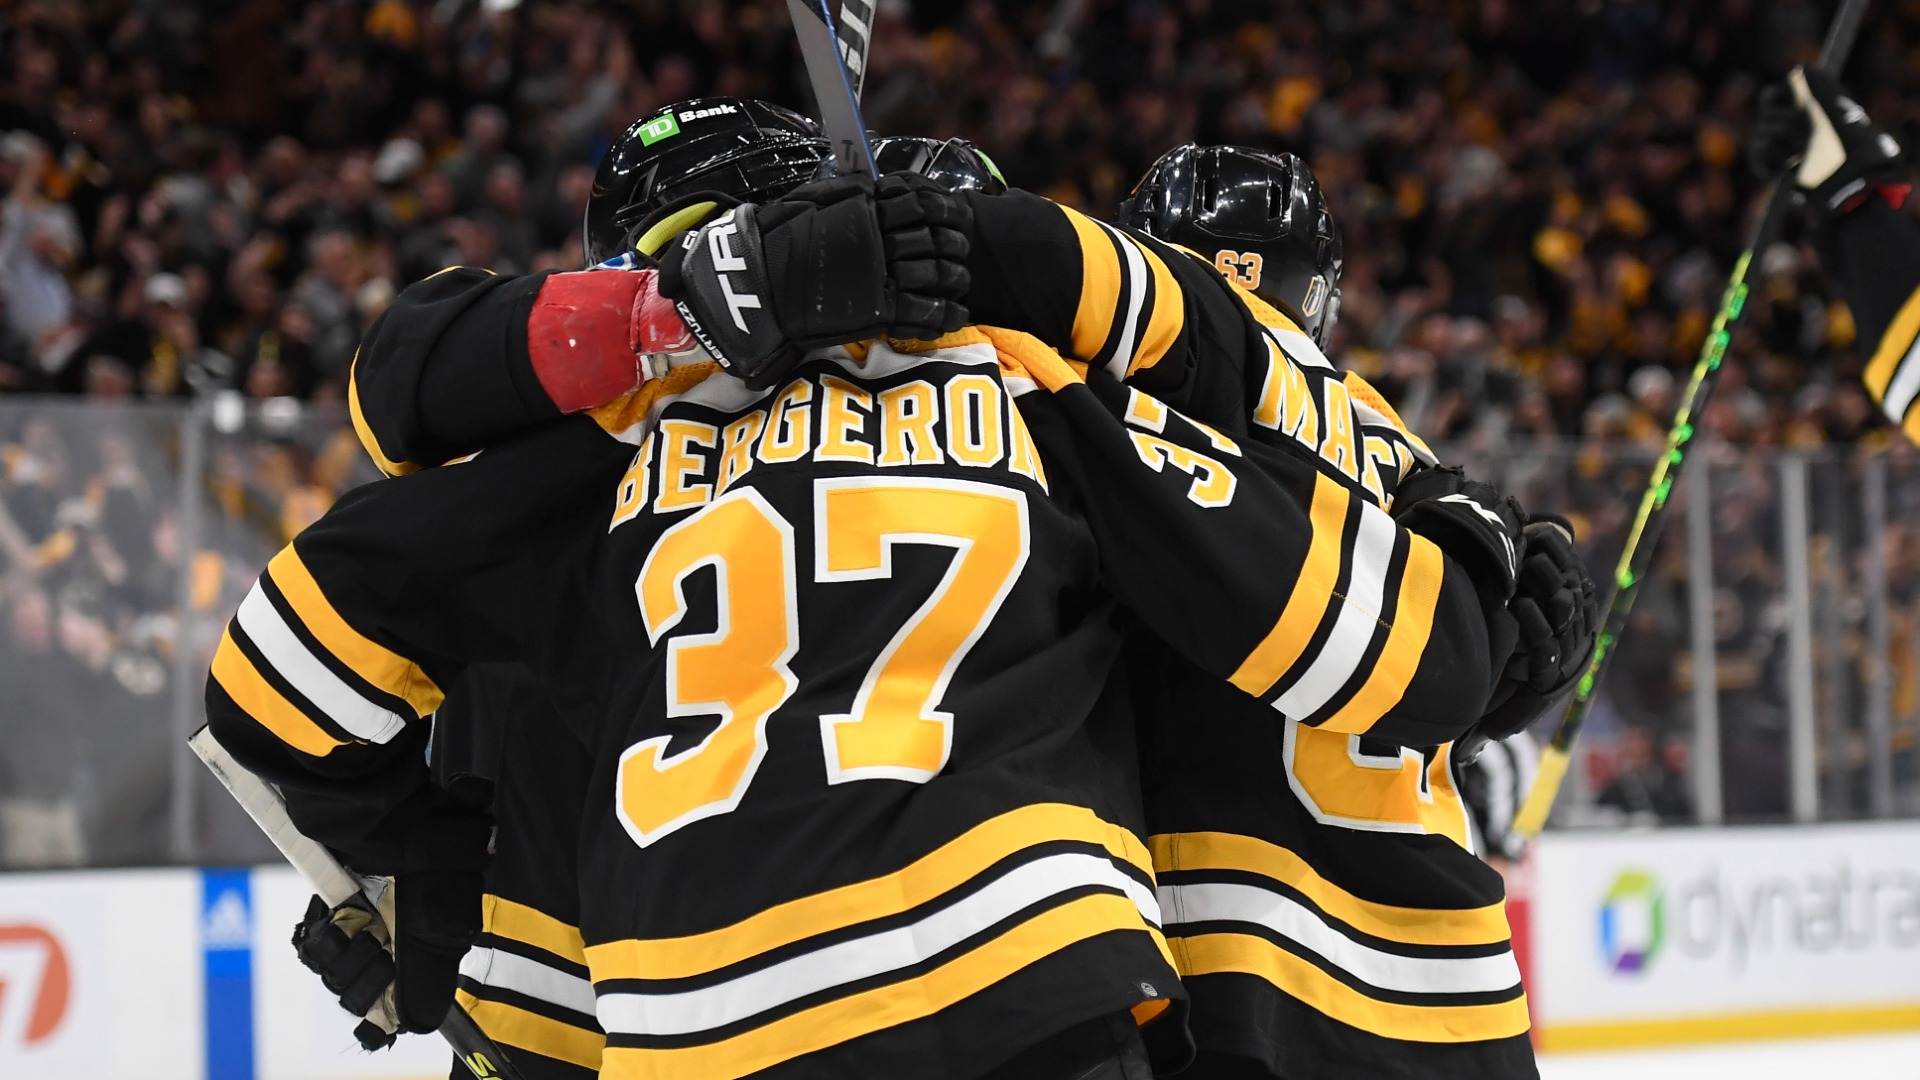 2k22 Player Ratings: Once again, Patrice Bergeron is the Business